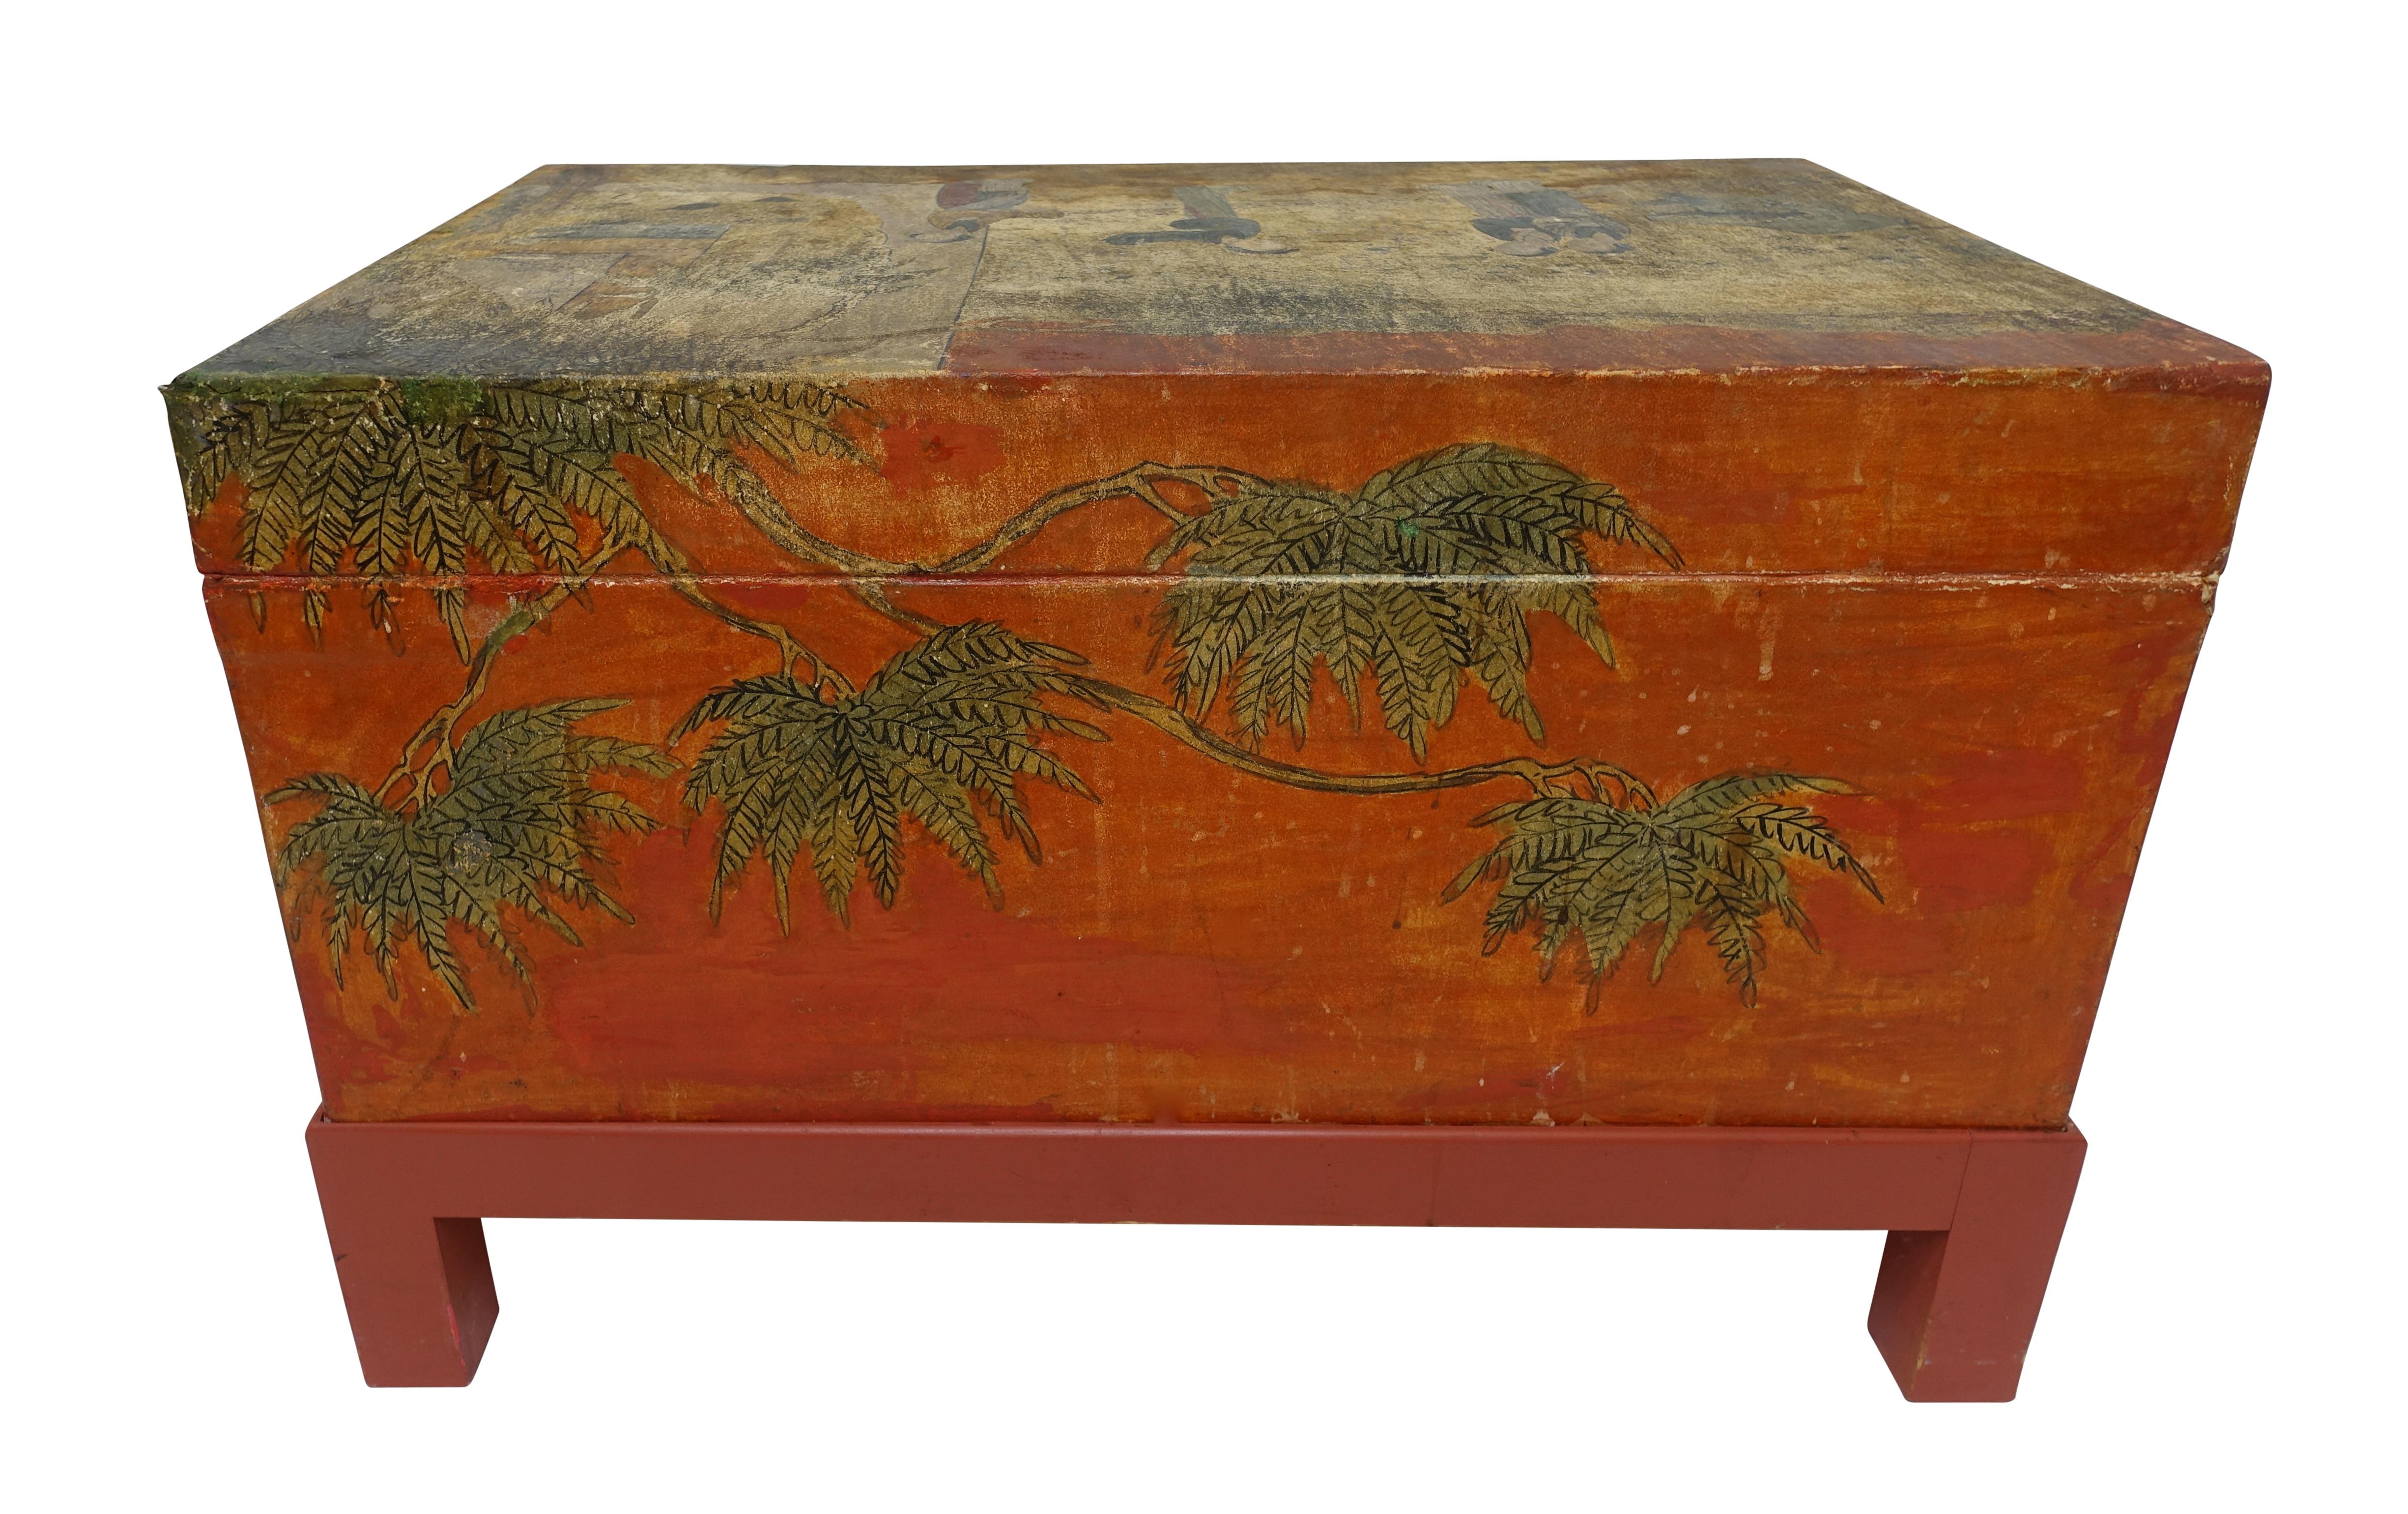 Chinese Export Hand-Painted Leather Trunk on Stand, Early 20th Century 7